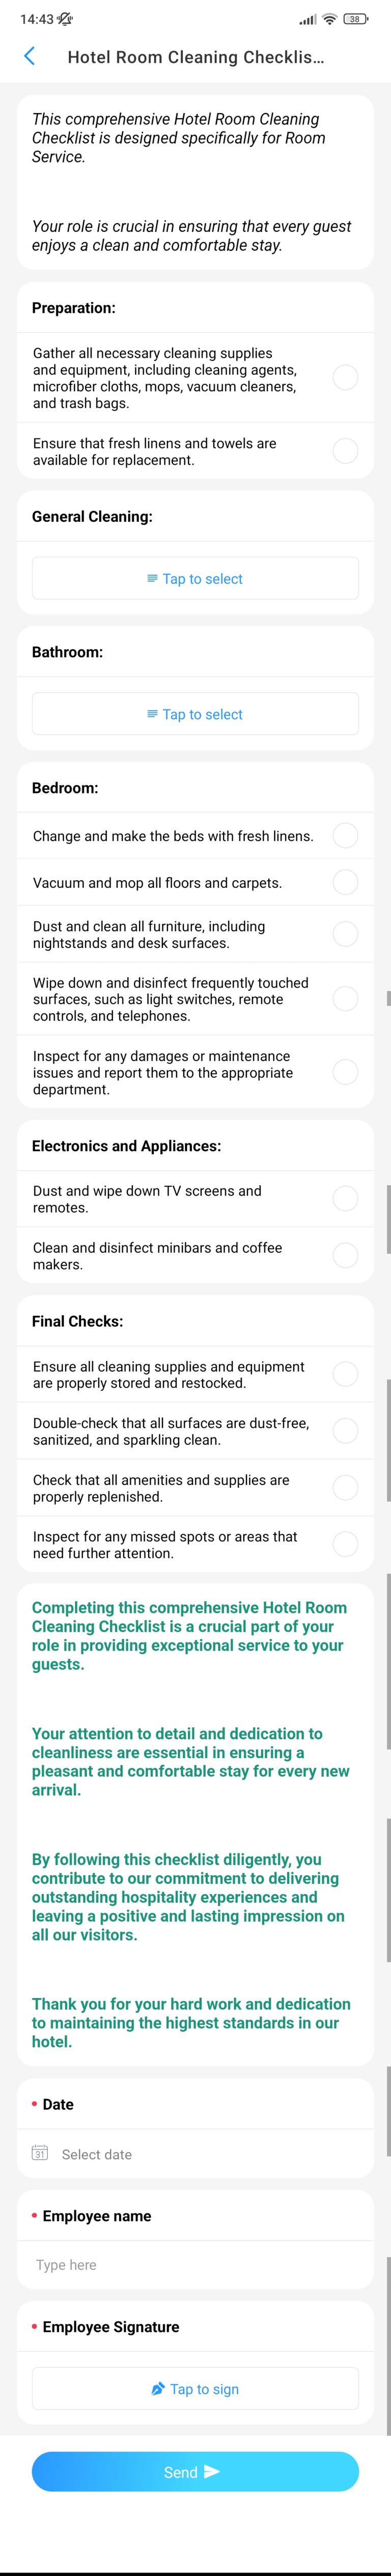 Hotel Room Cleaning Checklist for Happy Guests screenshot